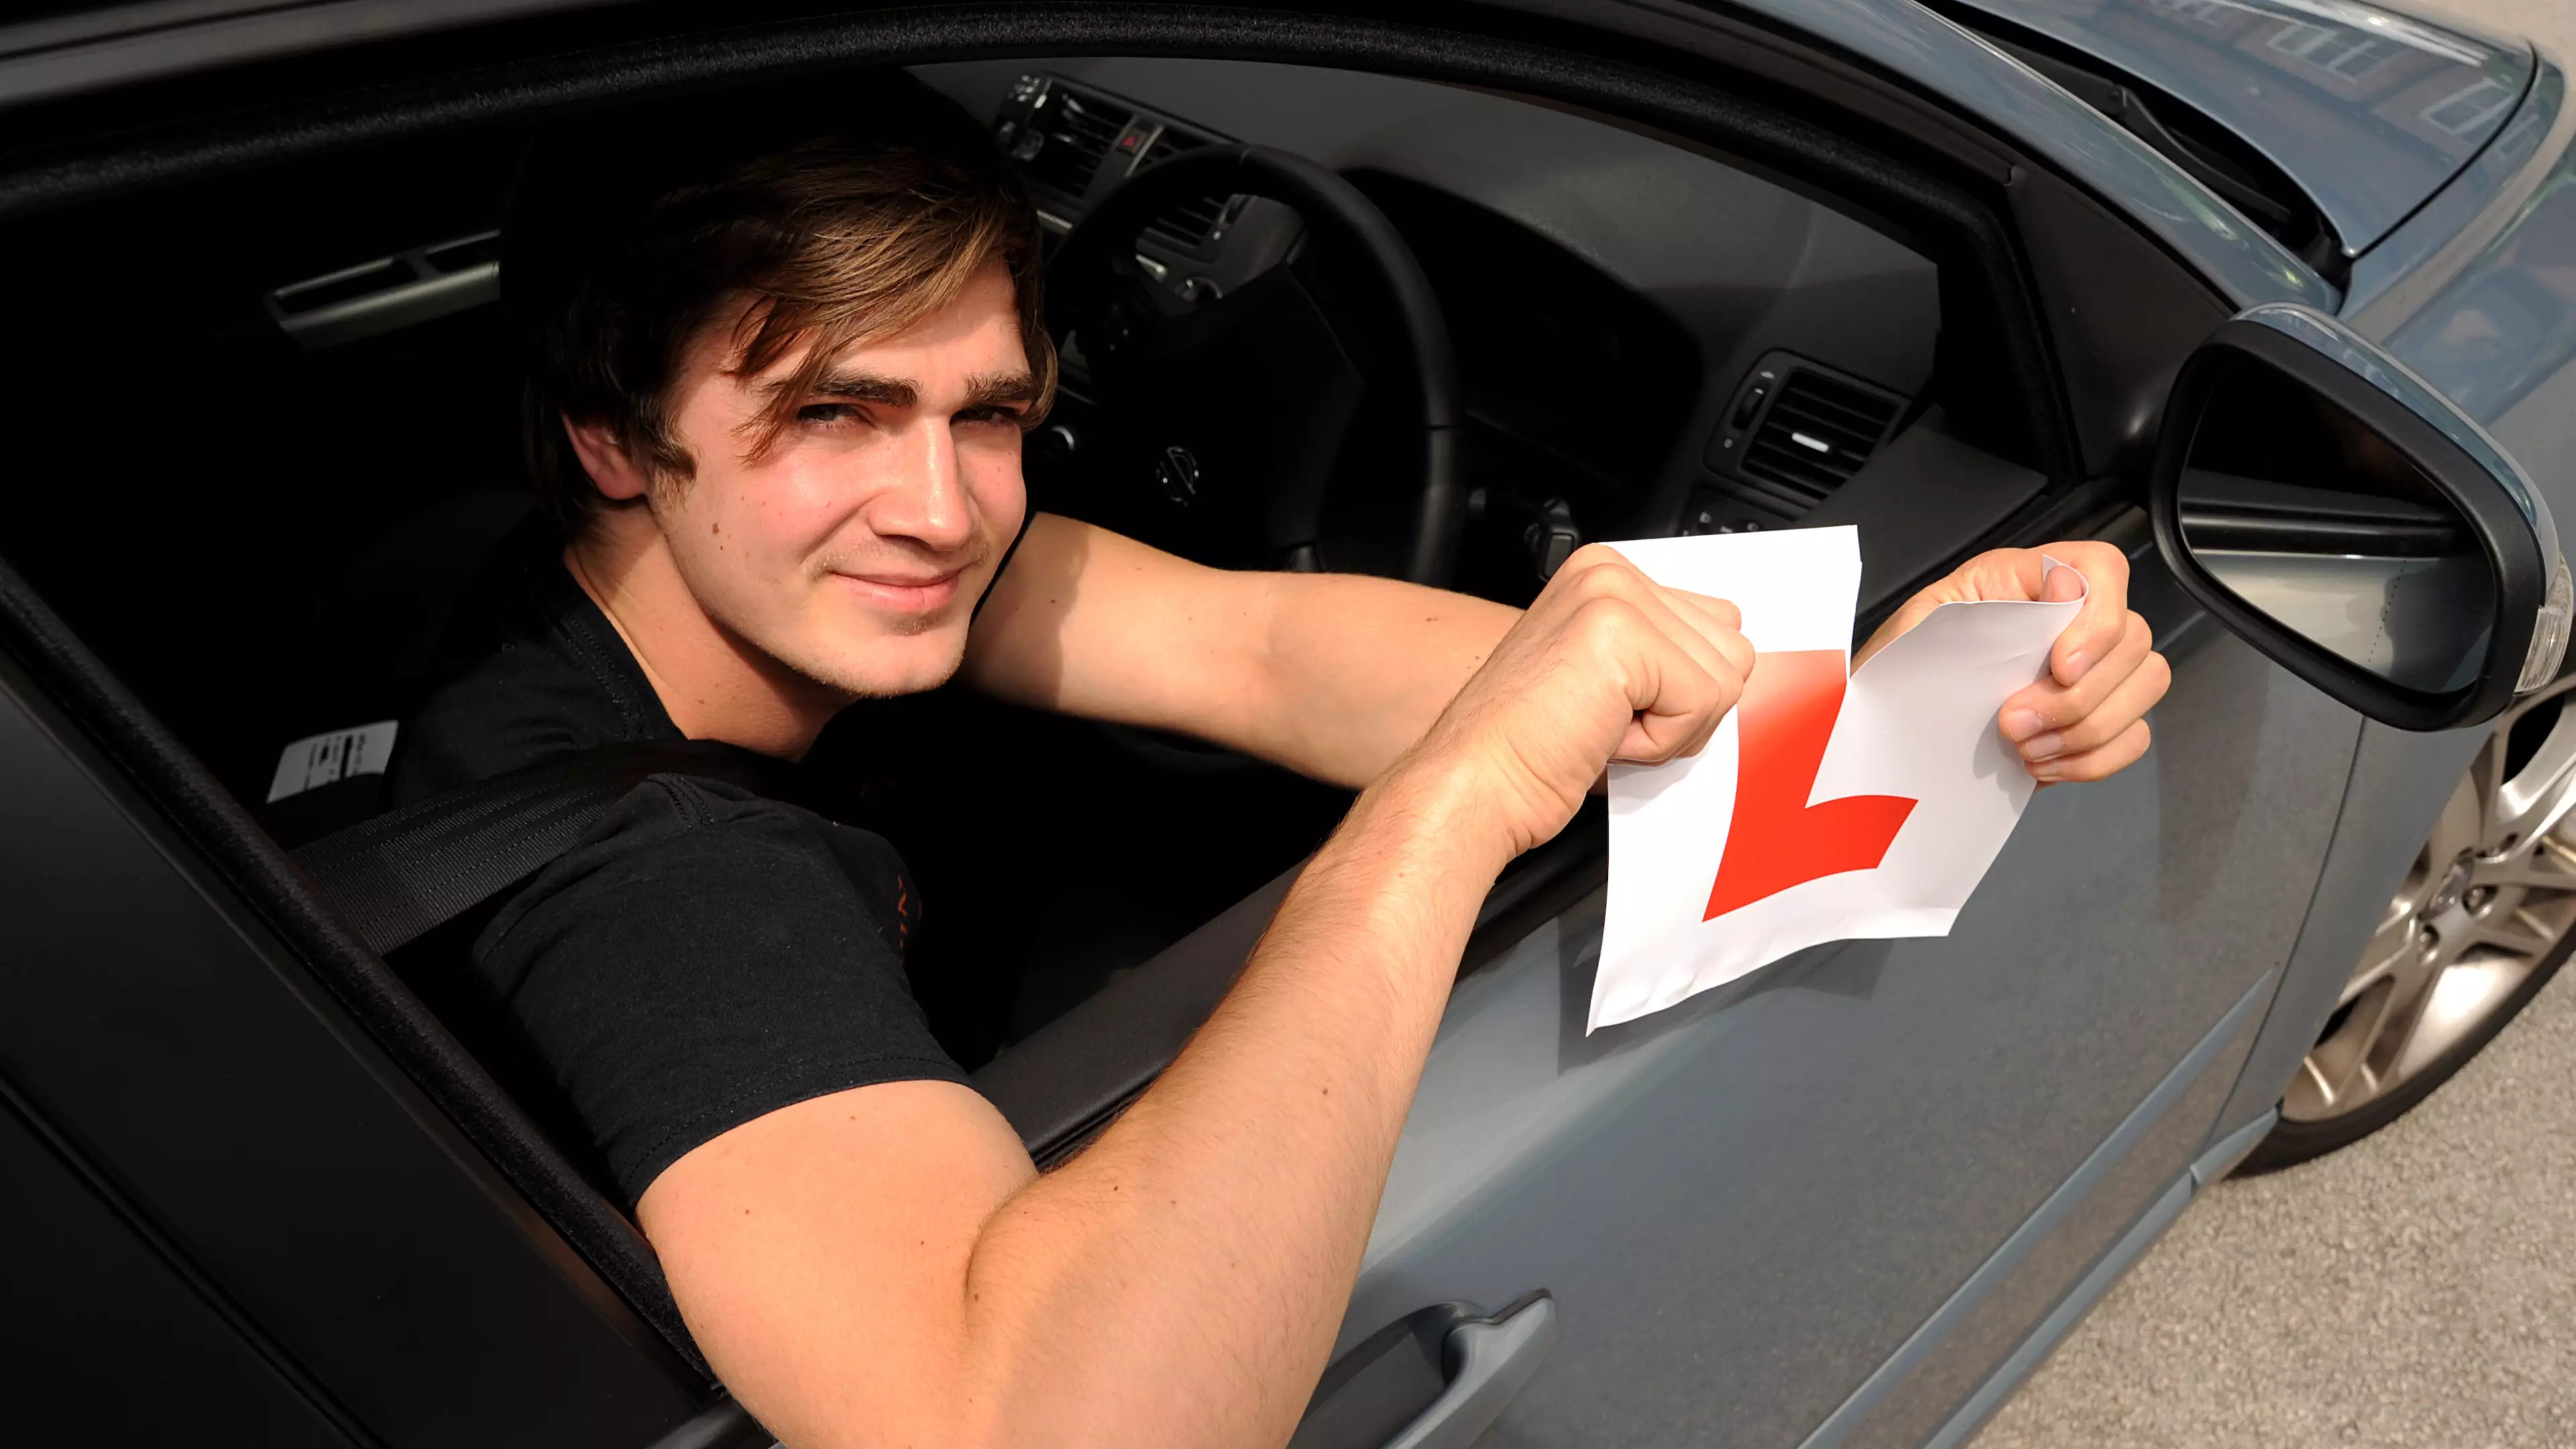 RAC Says Allowing Learners On Road Without Test Dangerous As 35,000 Sign Petition 